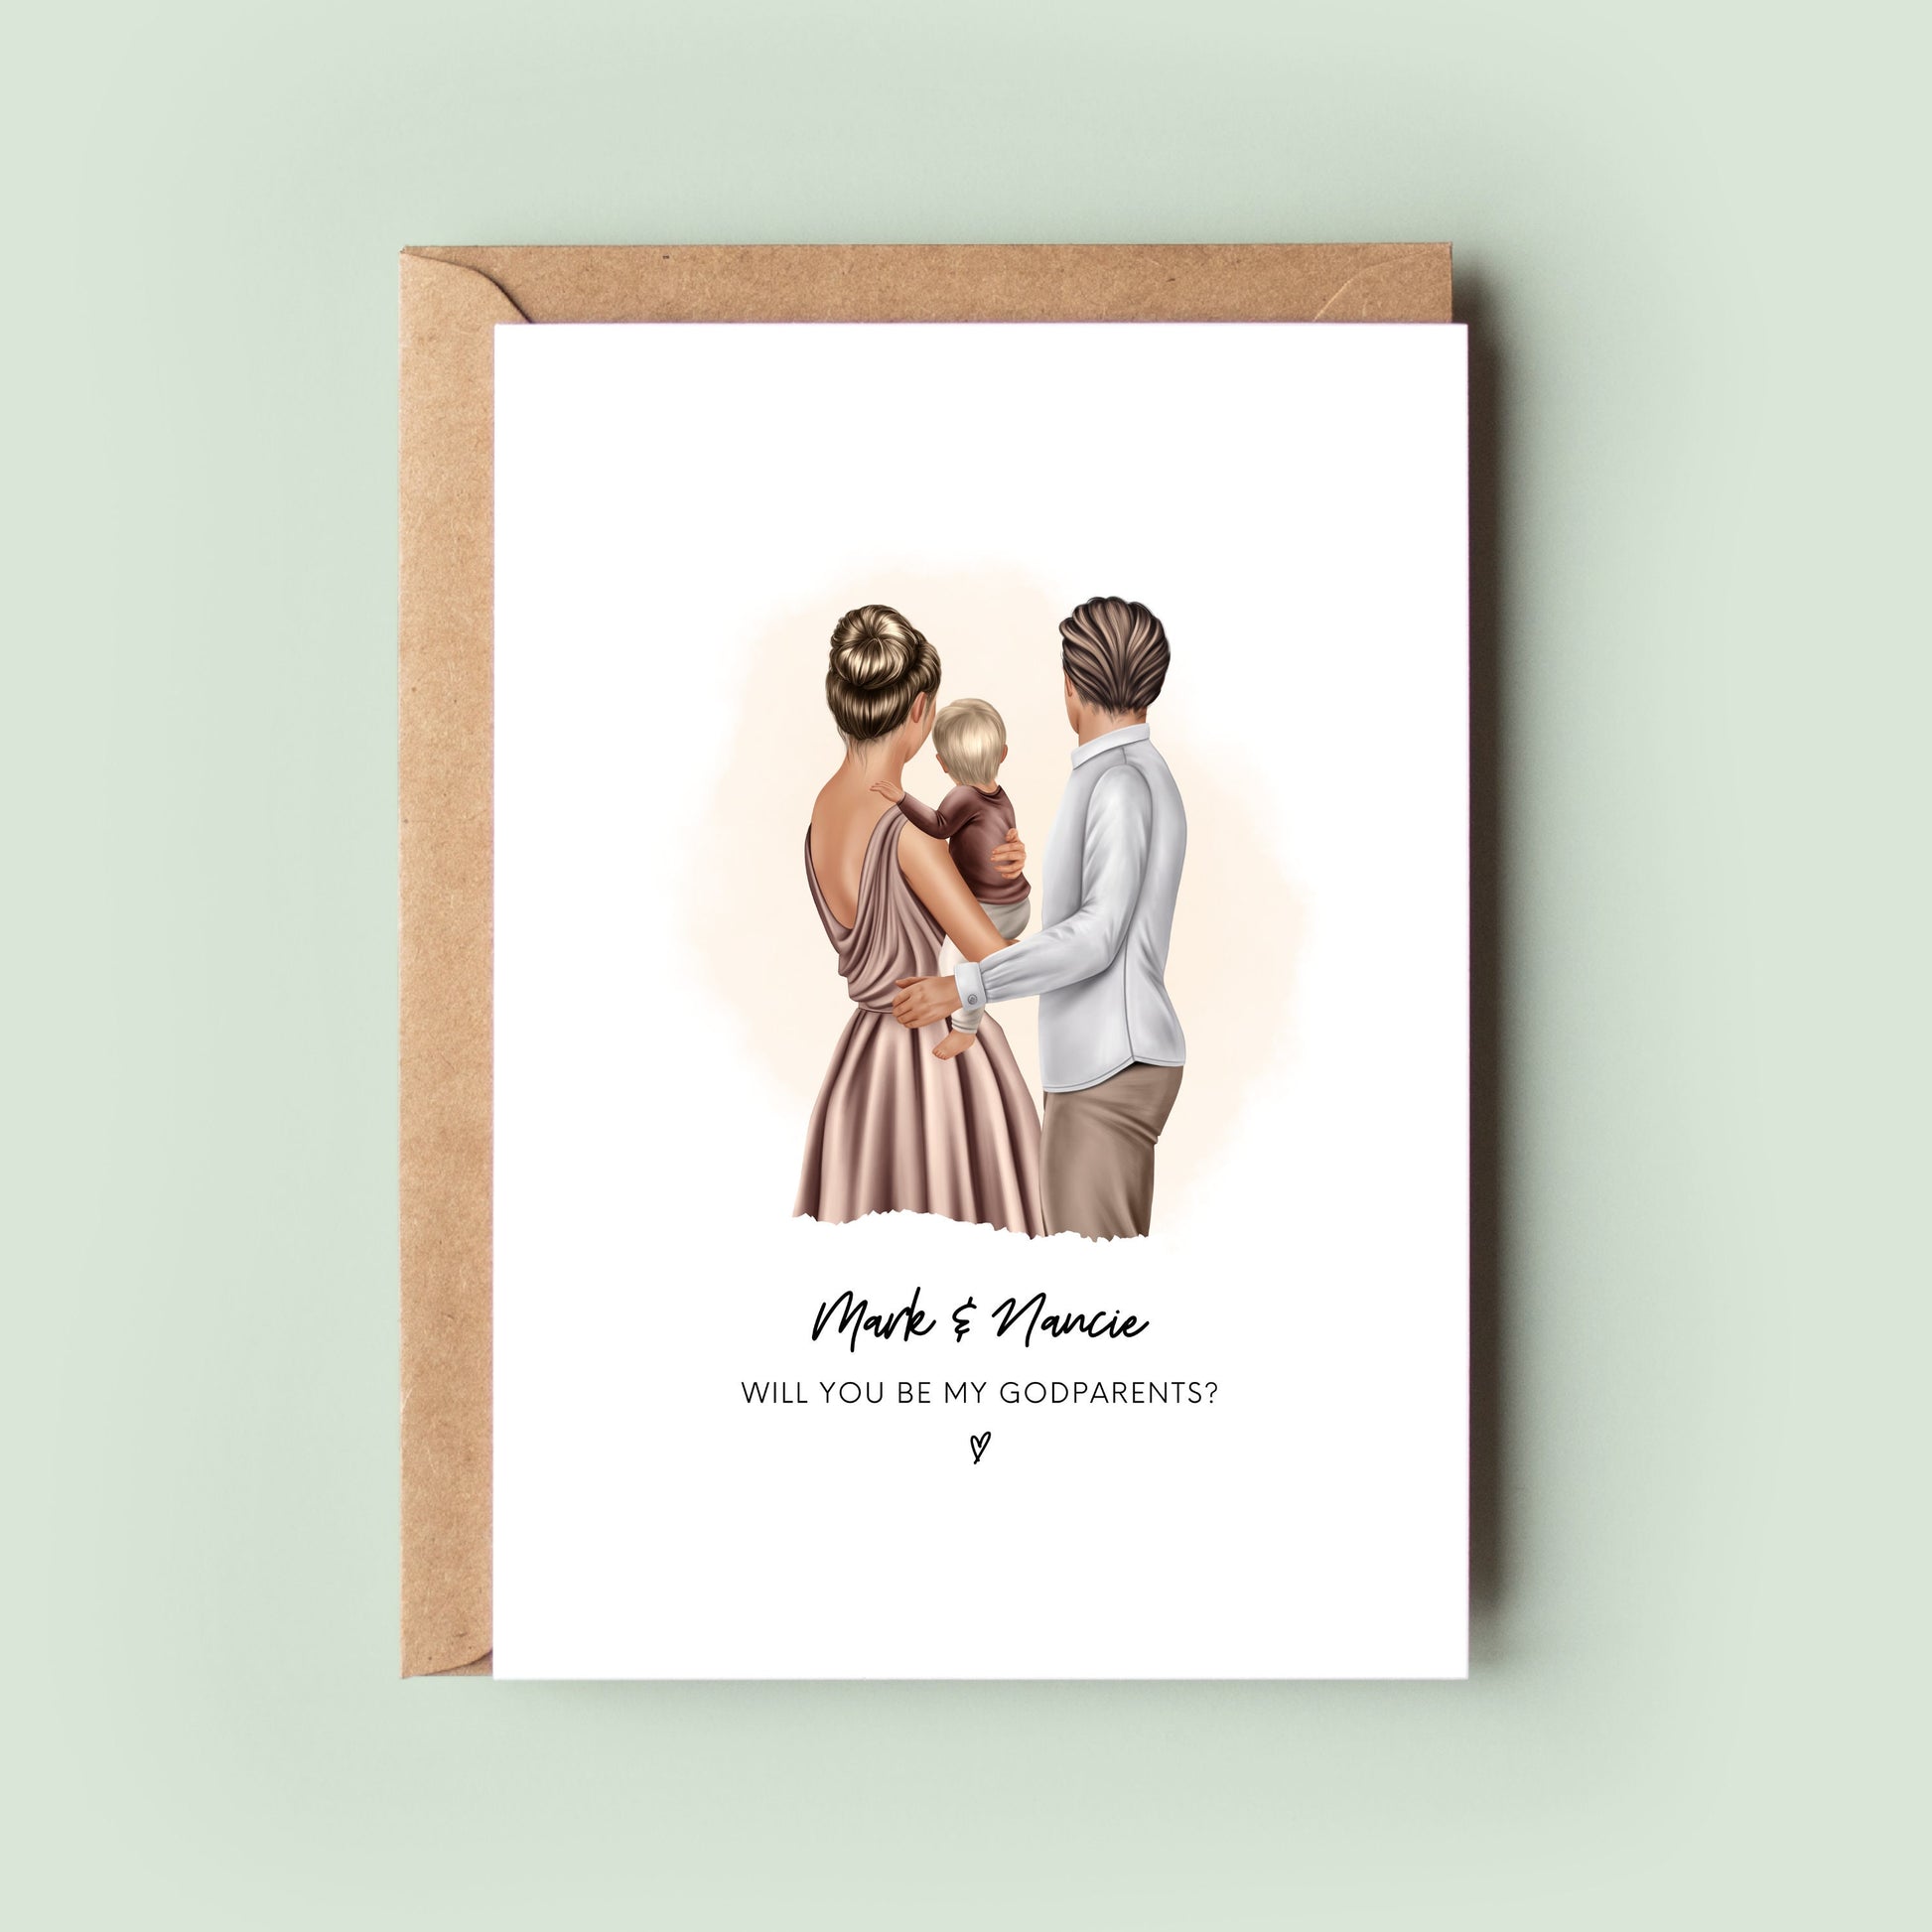 Personalised Godparents Card, Will You Be My Godparents Card, Godparent ProposalCard, Godparent Card, Christening Card, Godmother, Godfather